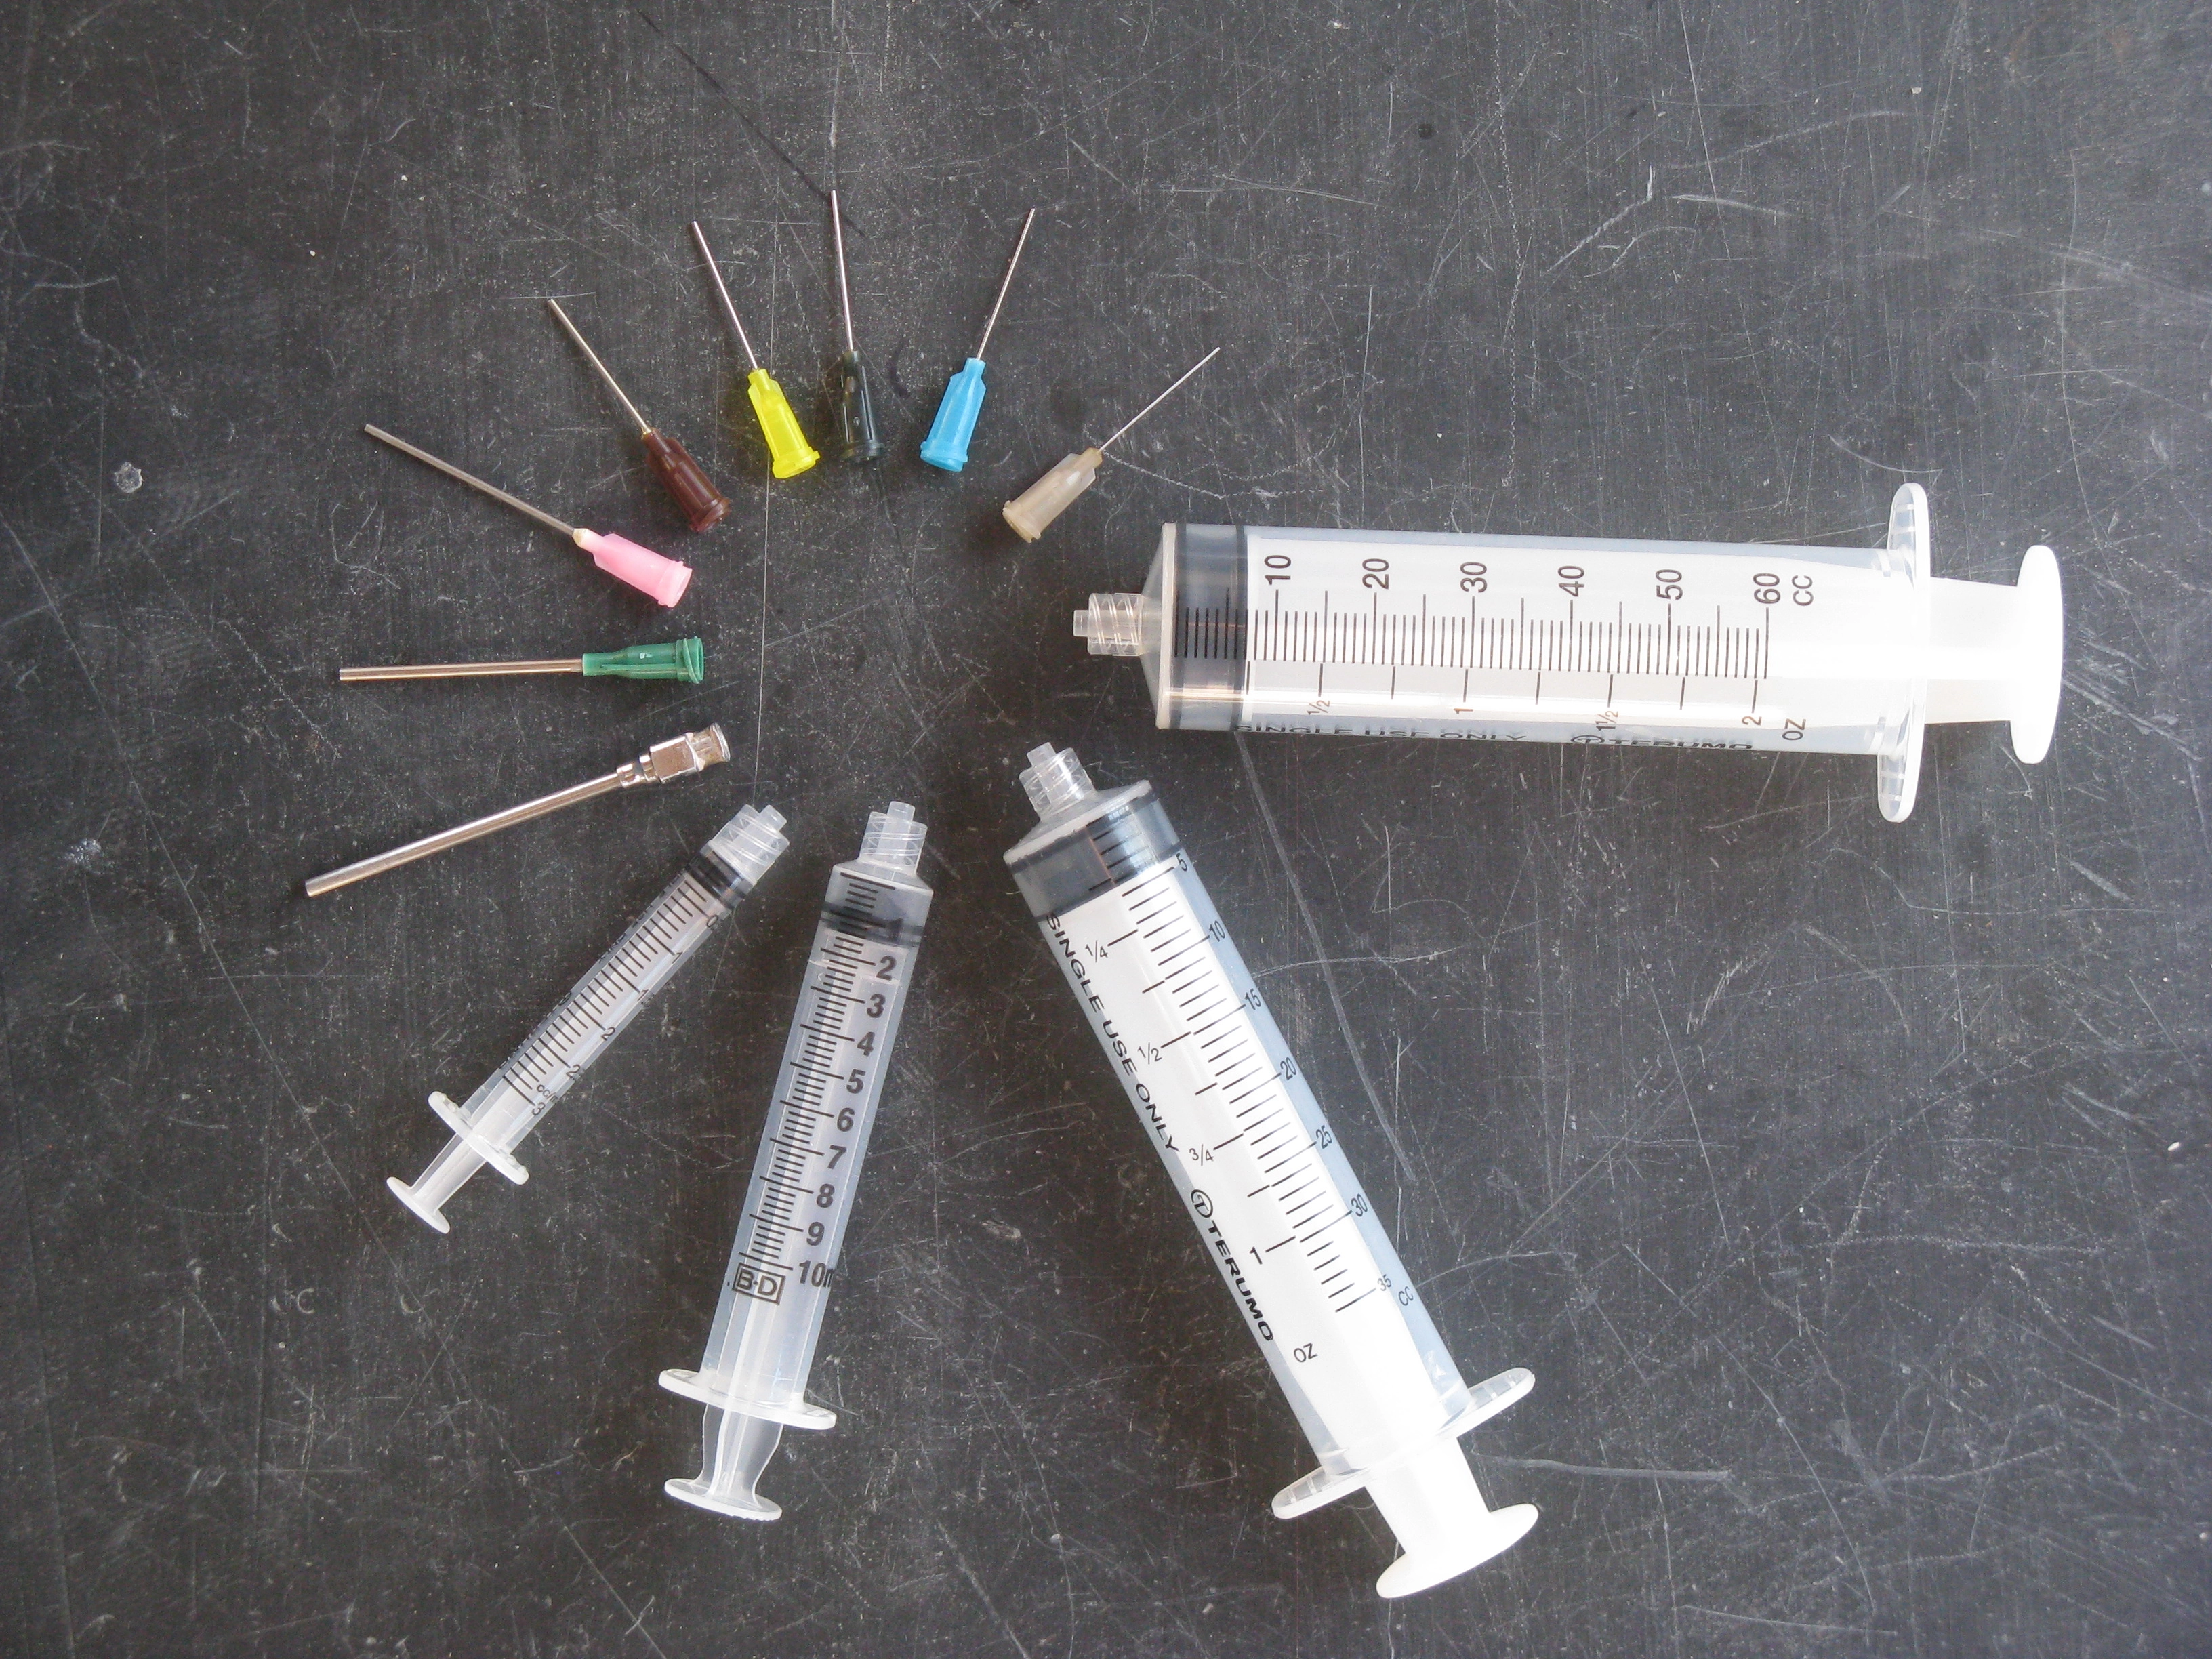 Applications of cracking needles in various industries